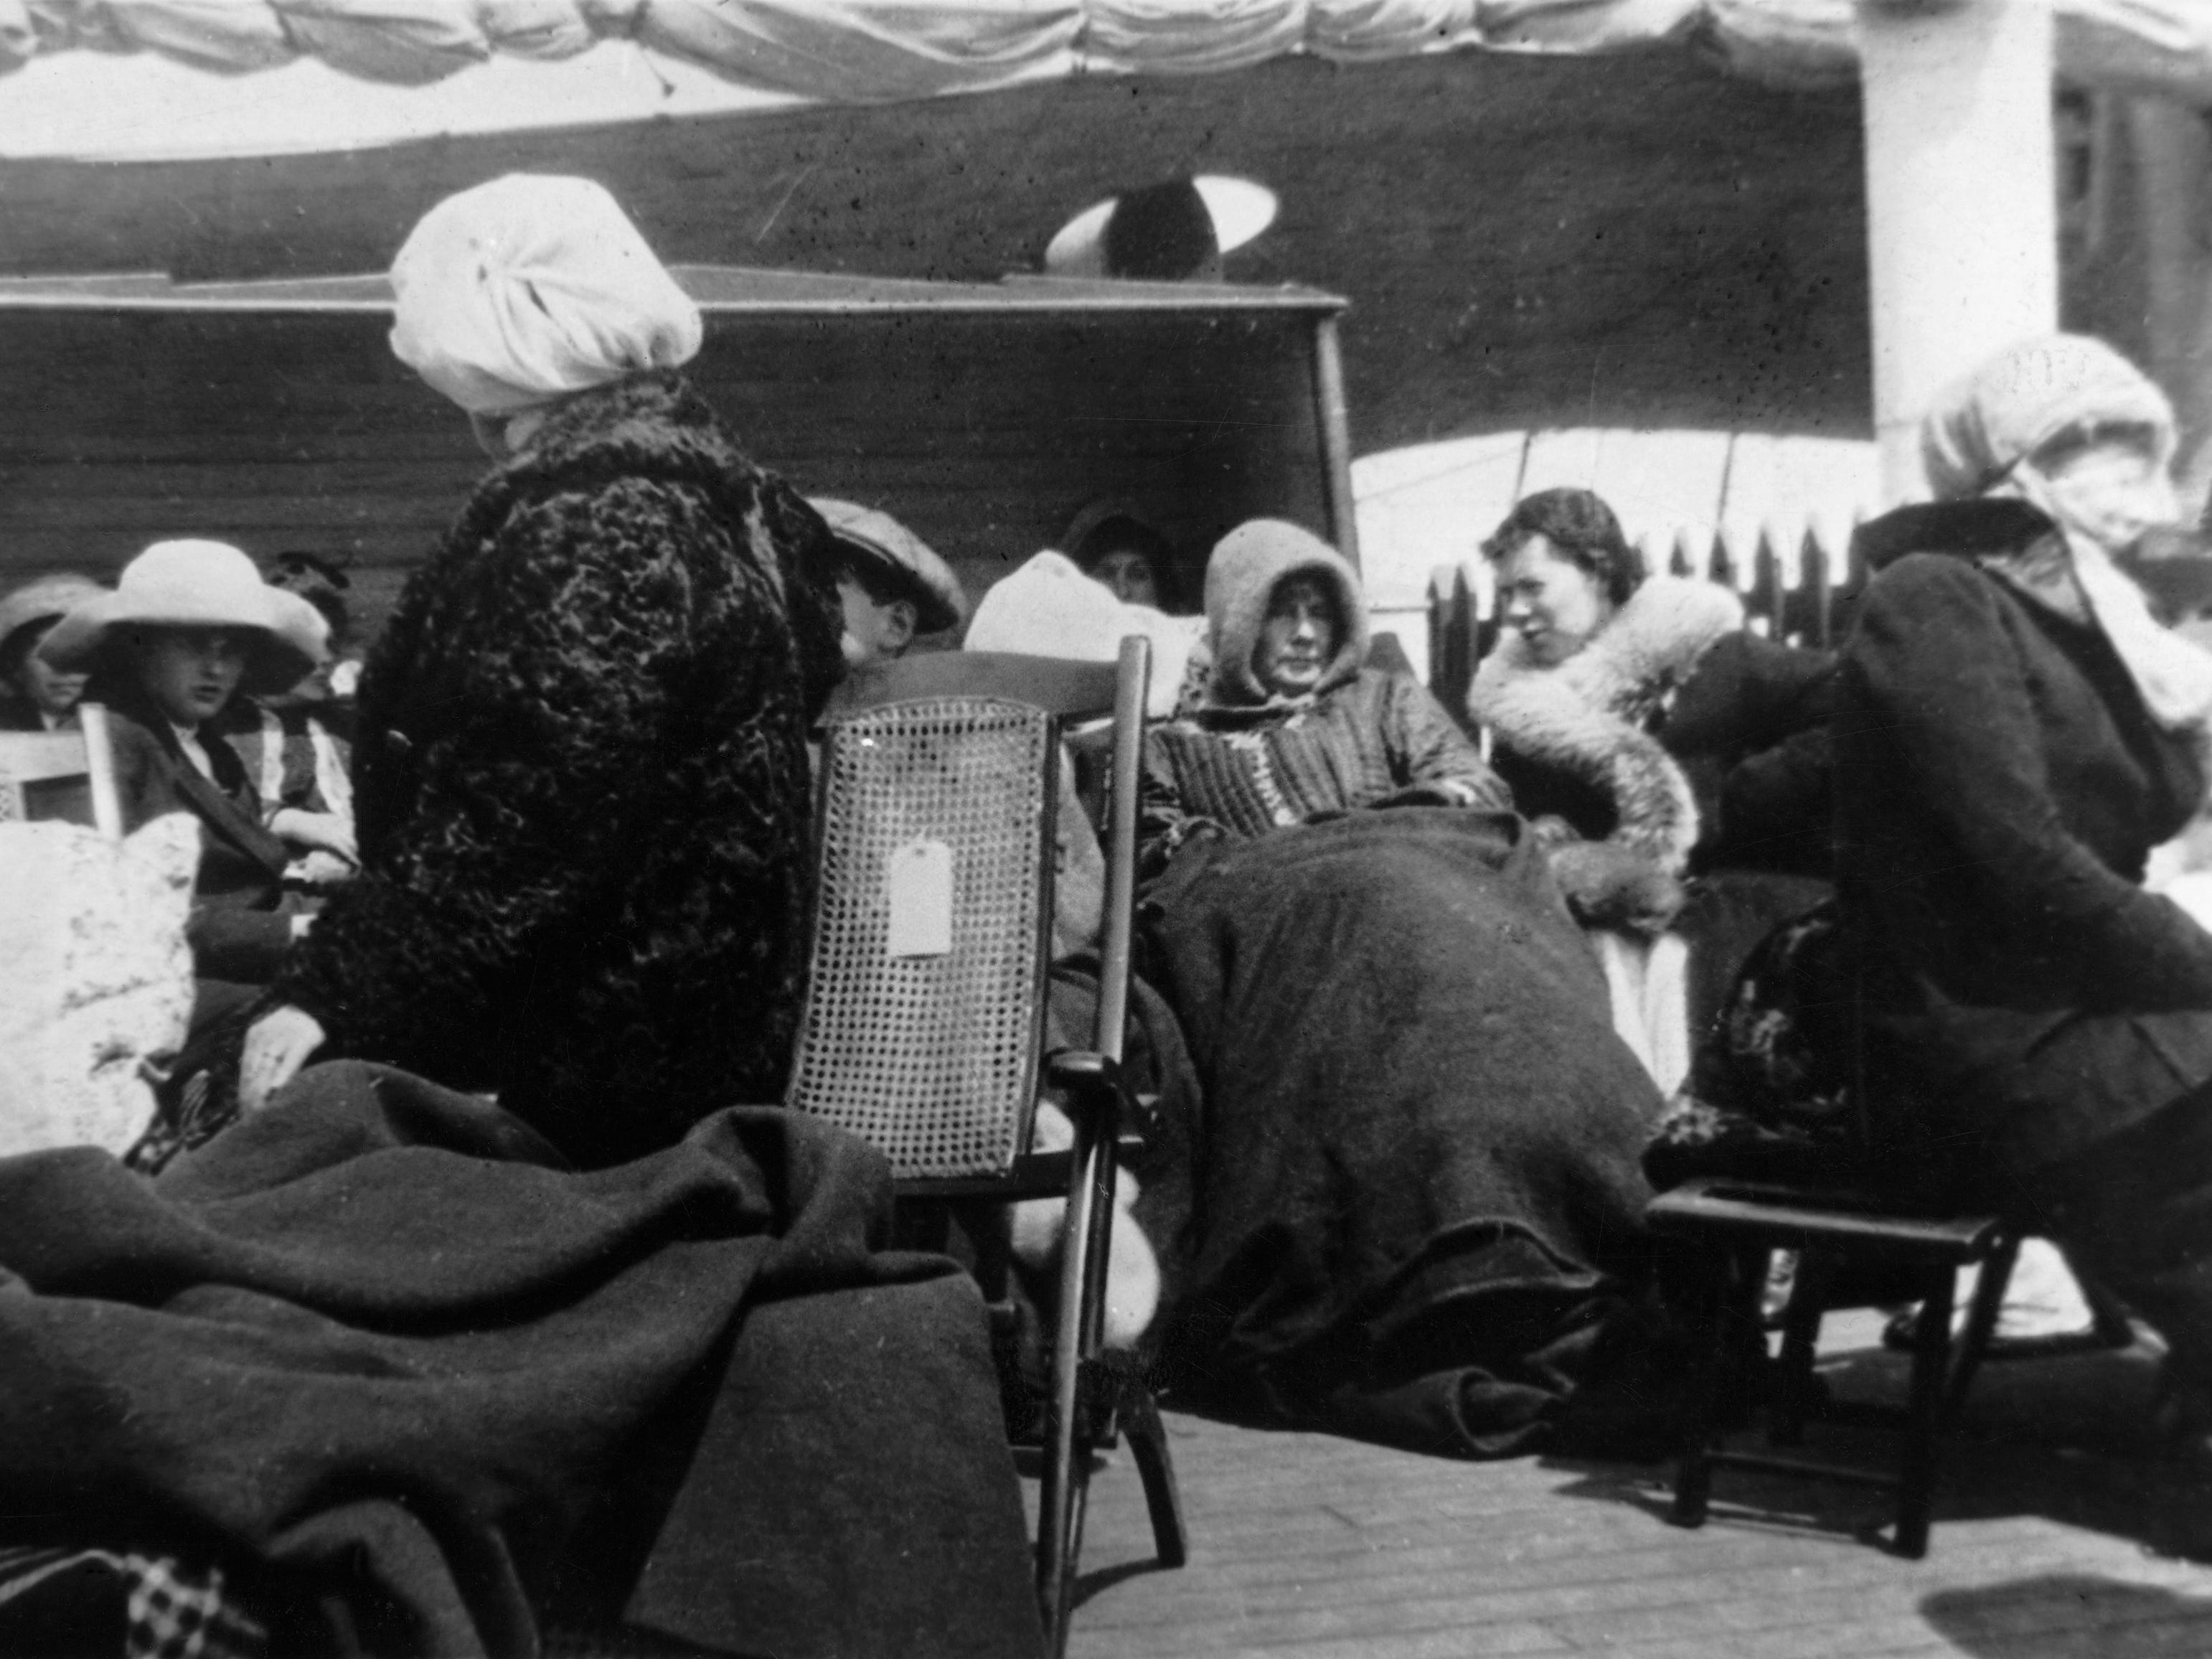 <p>The Carpathia's crew and fellow passengers gave their beds to survivors and offered them warm clothing and blankets, <a href="https://www.maritime-executive.com/article/carpathias-role-in-titanic-rescue">reported the Maritime Executive</a>. Many of the survivors were upset and could do nothing but cry, or were shell-shocked by what they had experienced. </p>